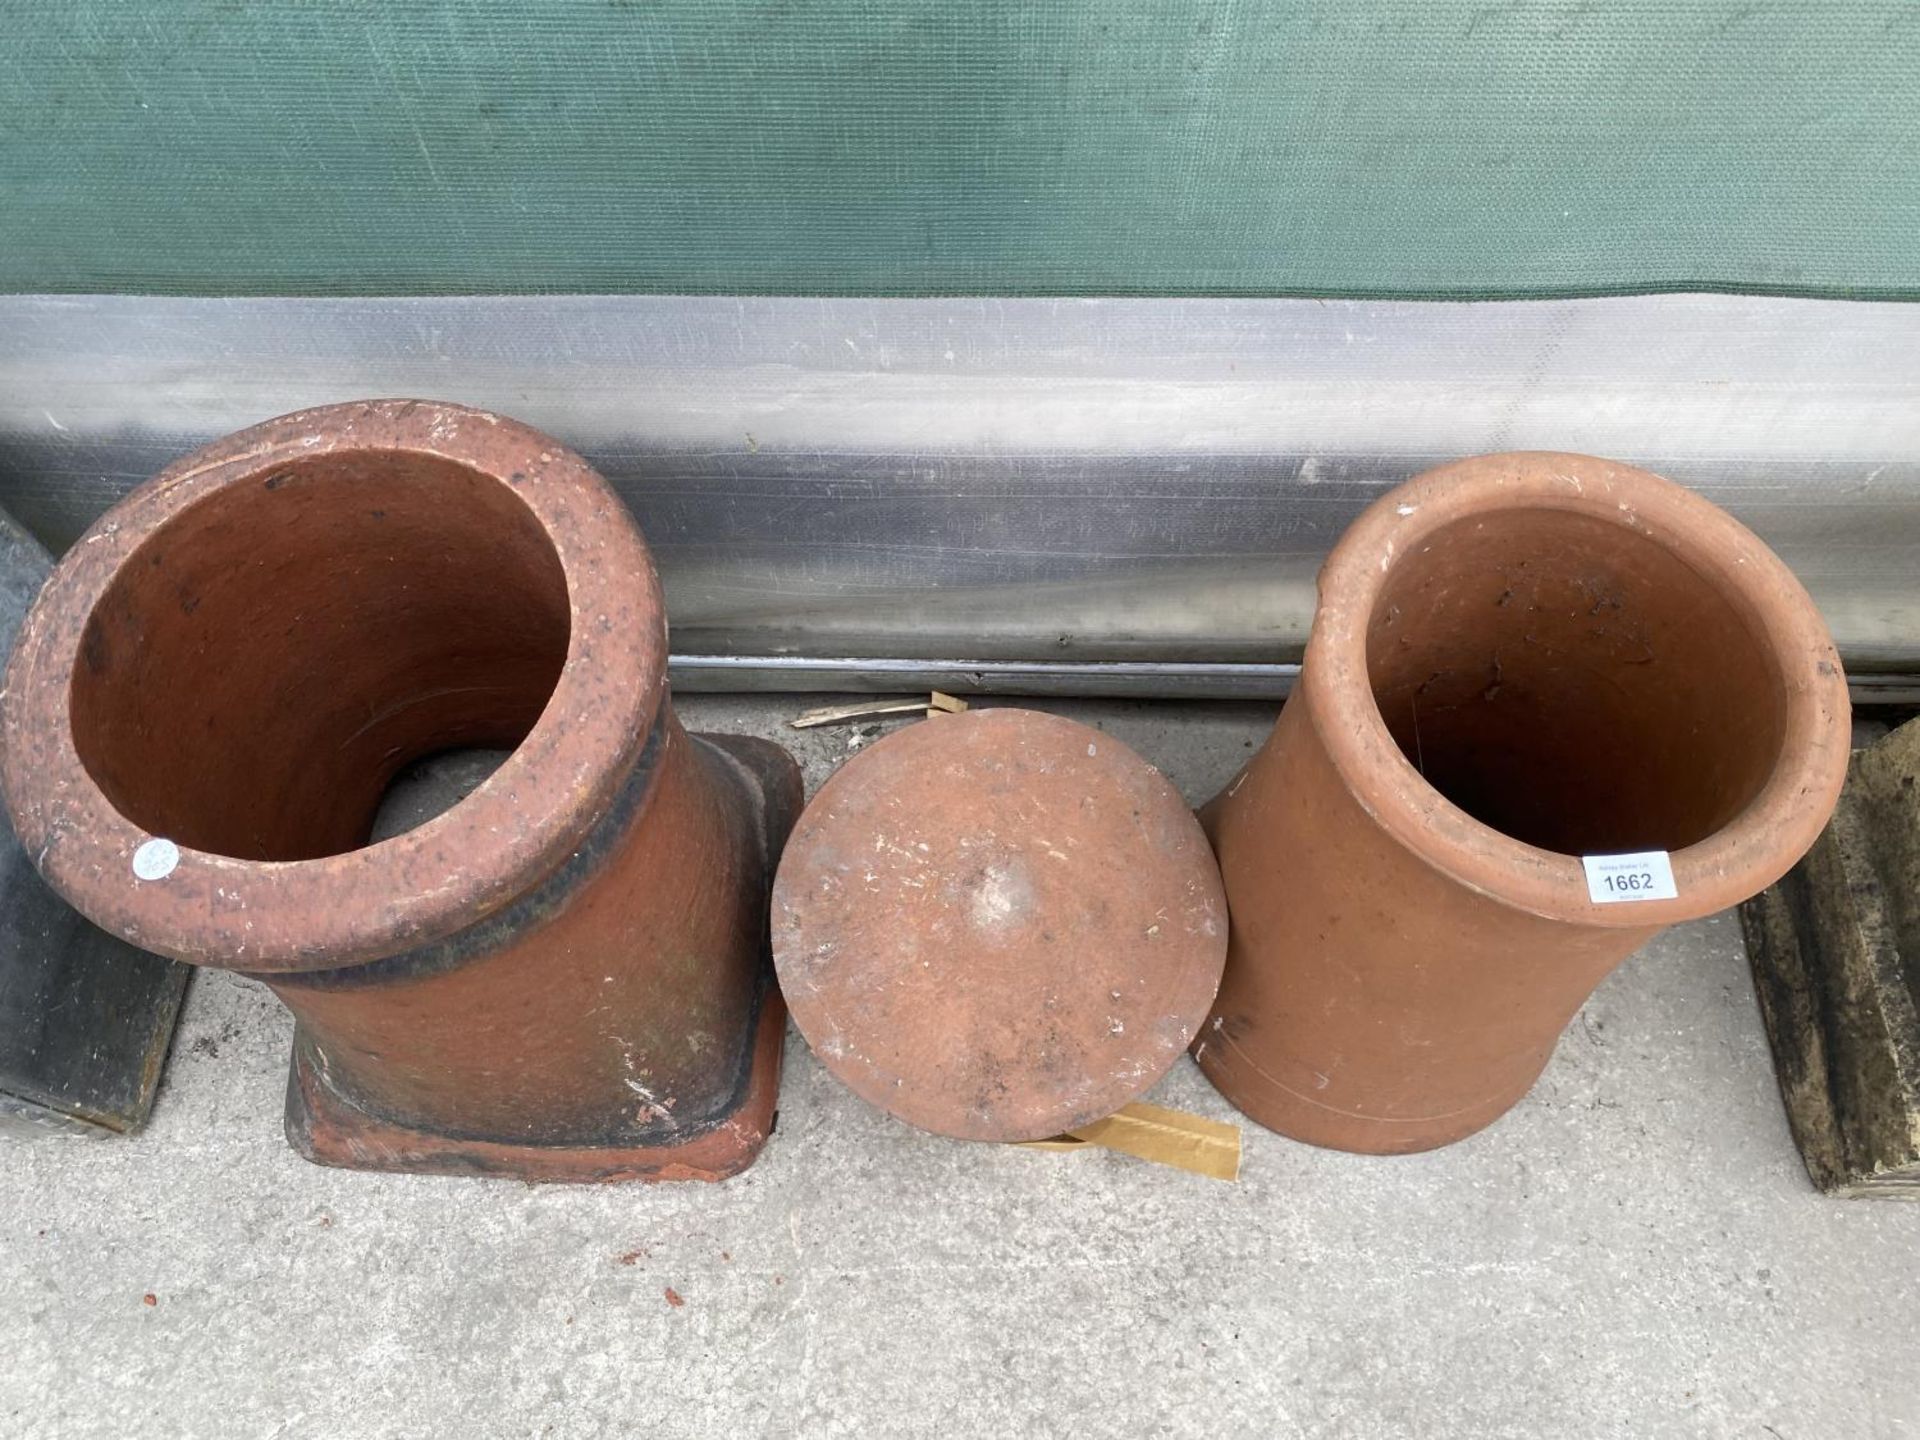 TWO TERRACOTTA CHIMNEY POTS AND A TOP - Image 2 of 2